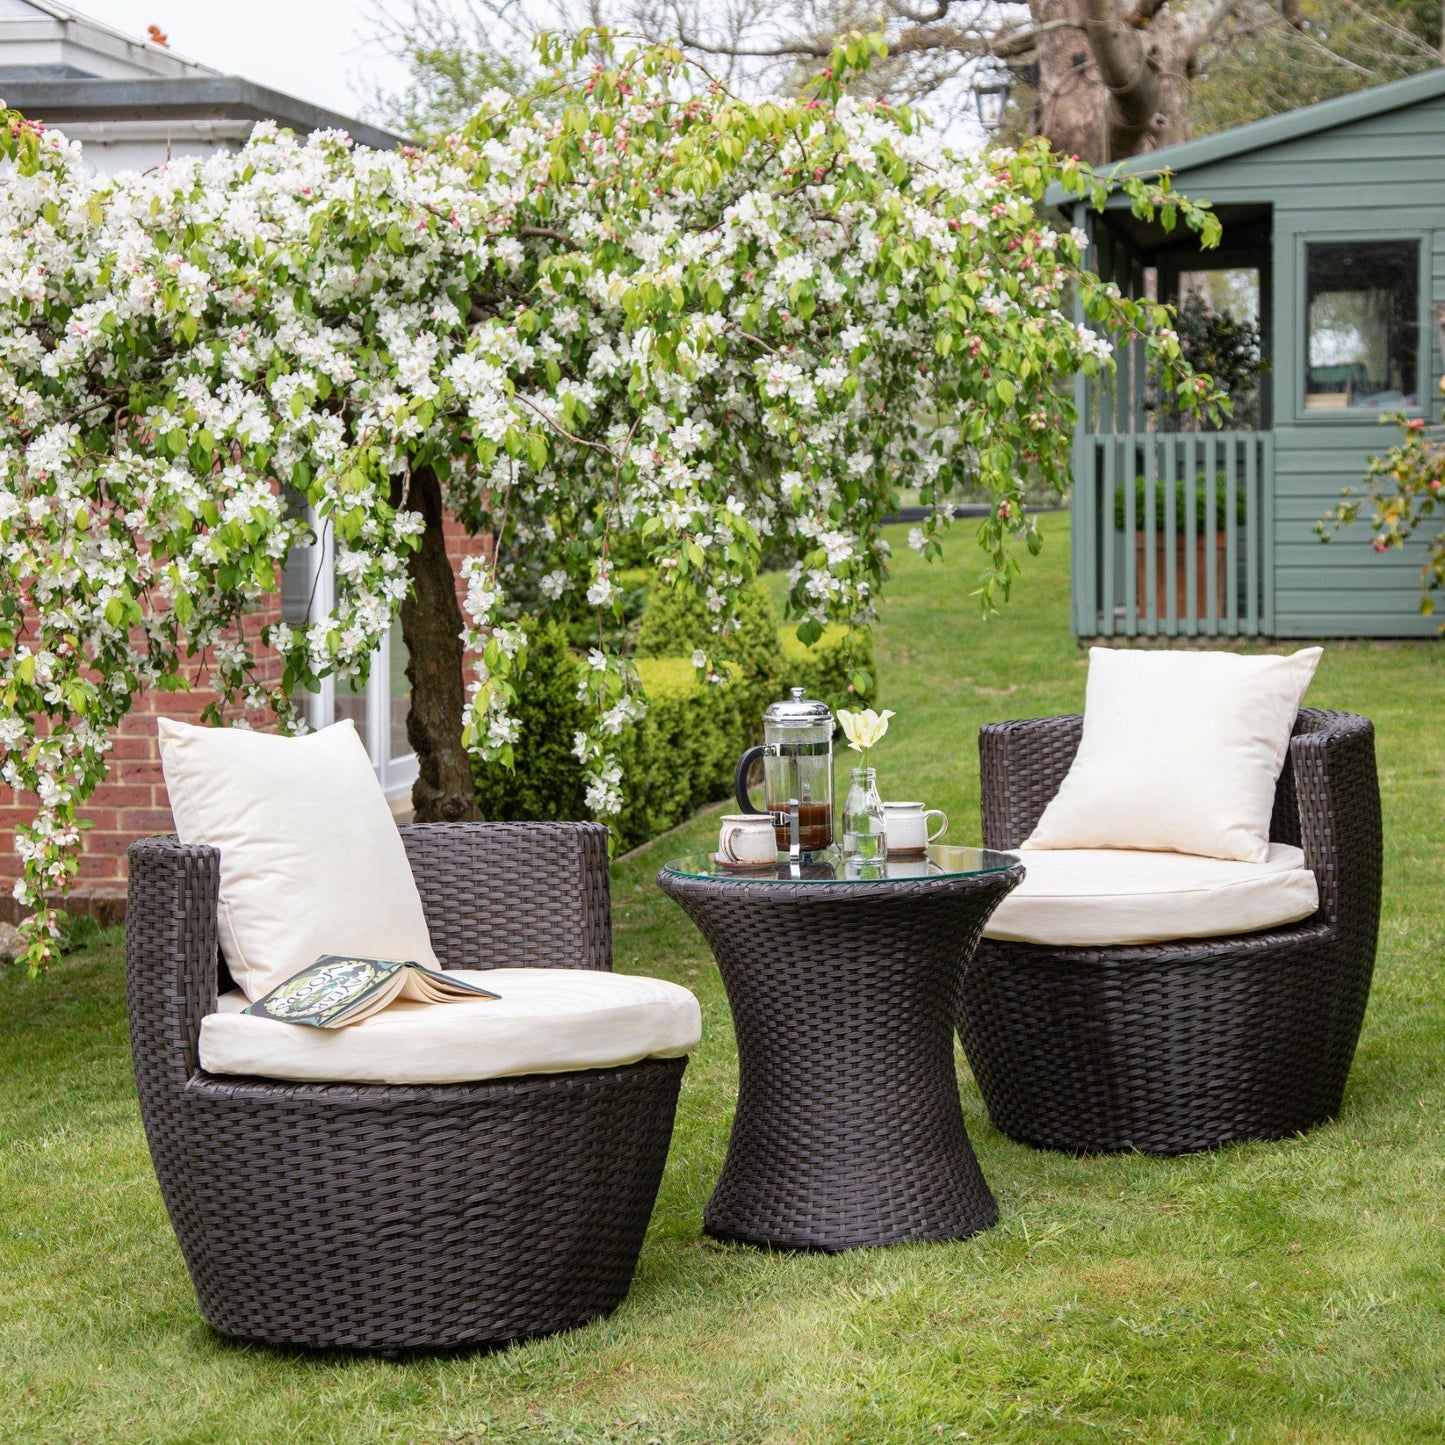 2 Seater Rattan Egg Chair Bistro Set - Brown - In Stock Date - 16th June 2020 - Laura James